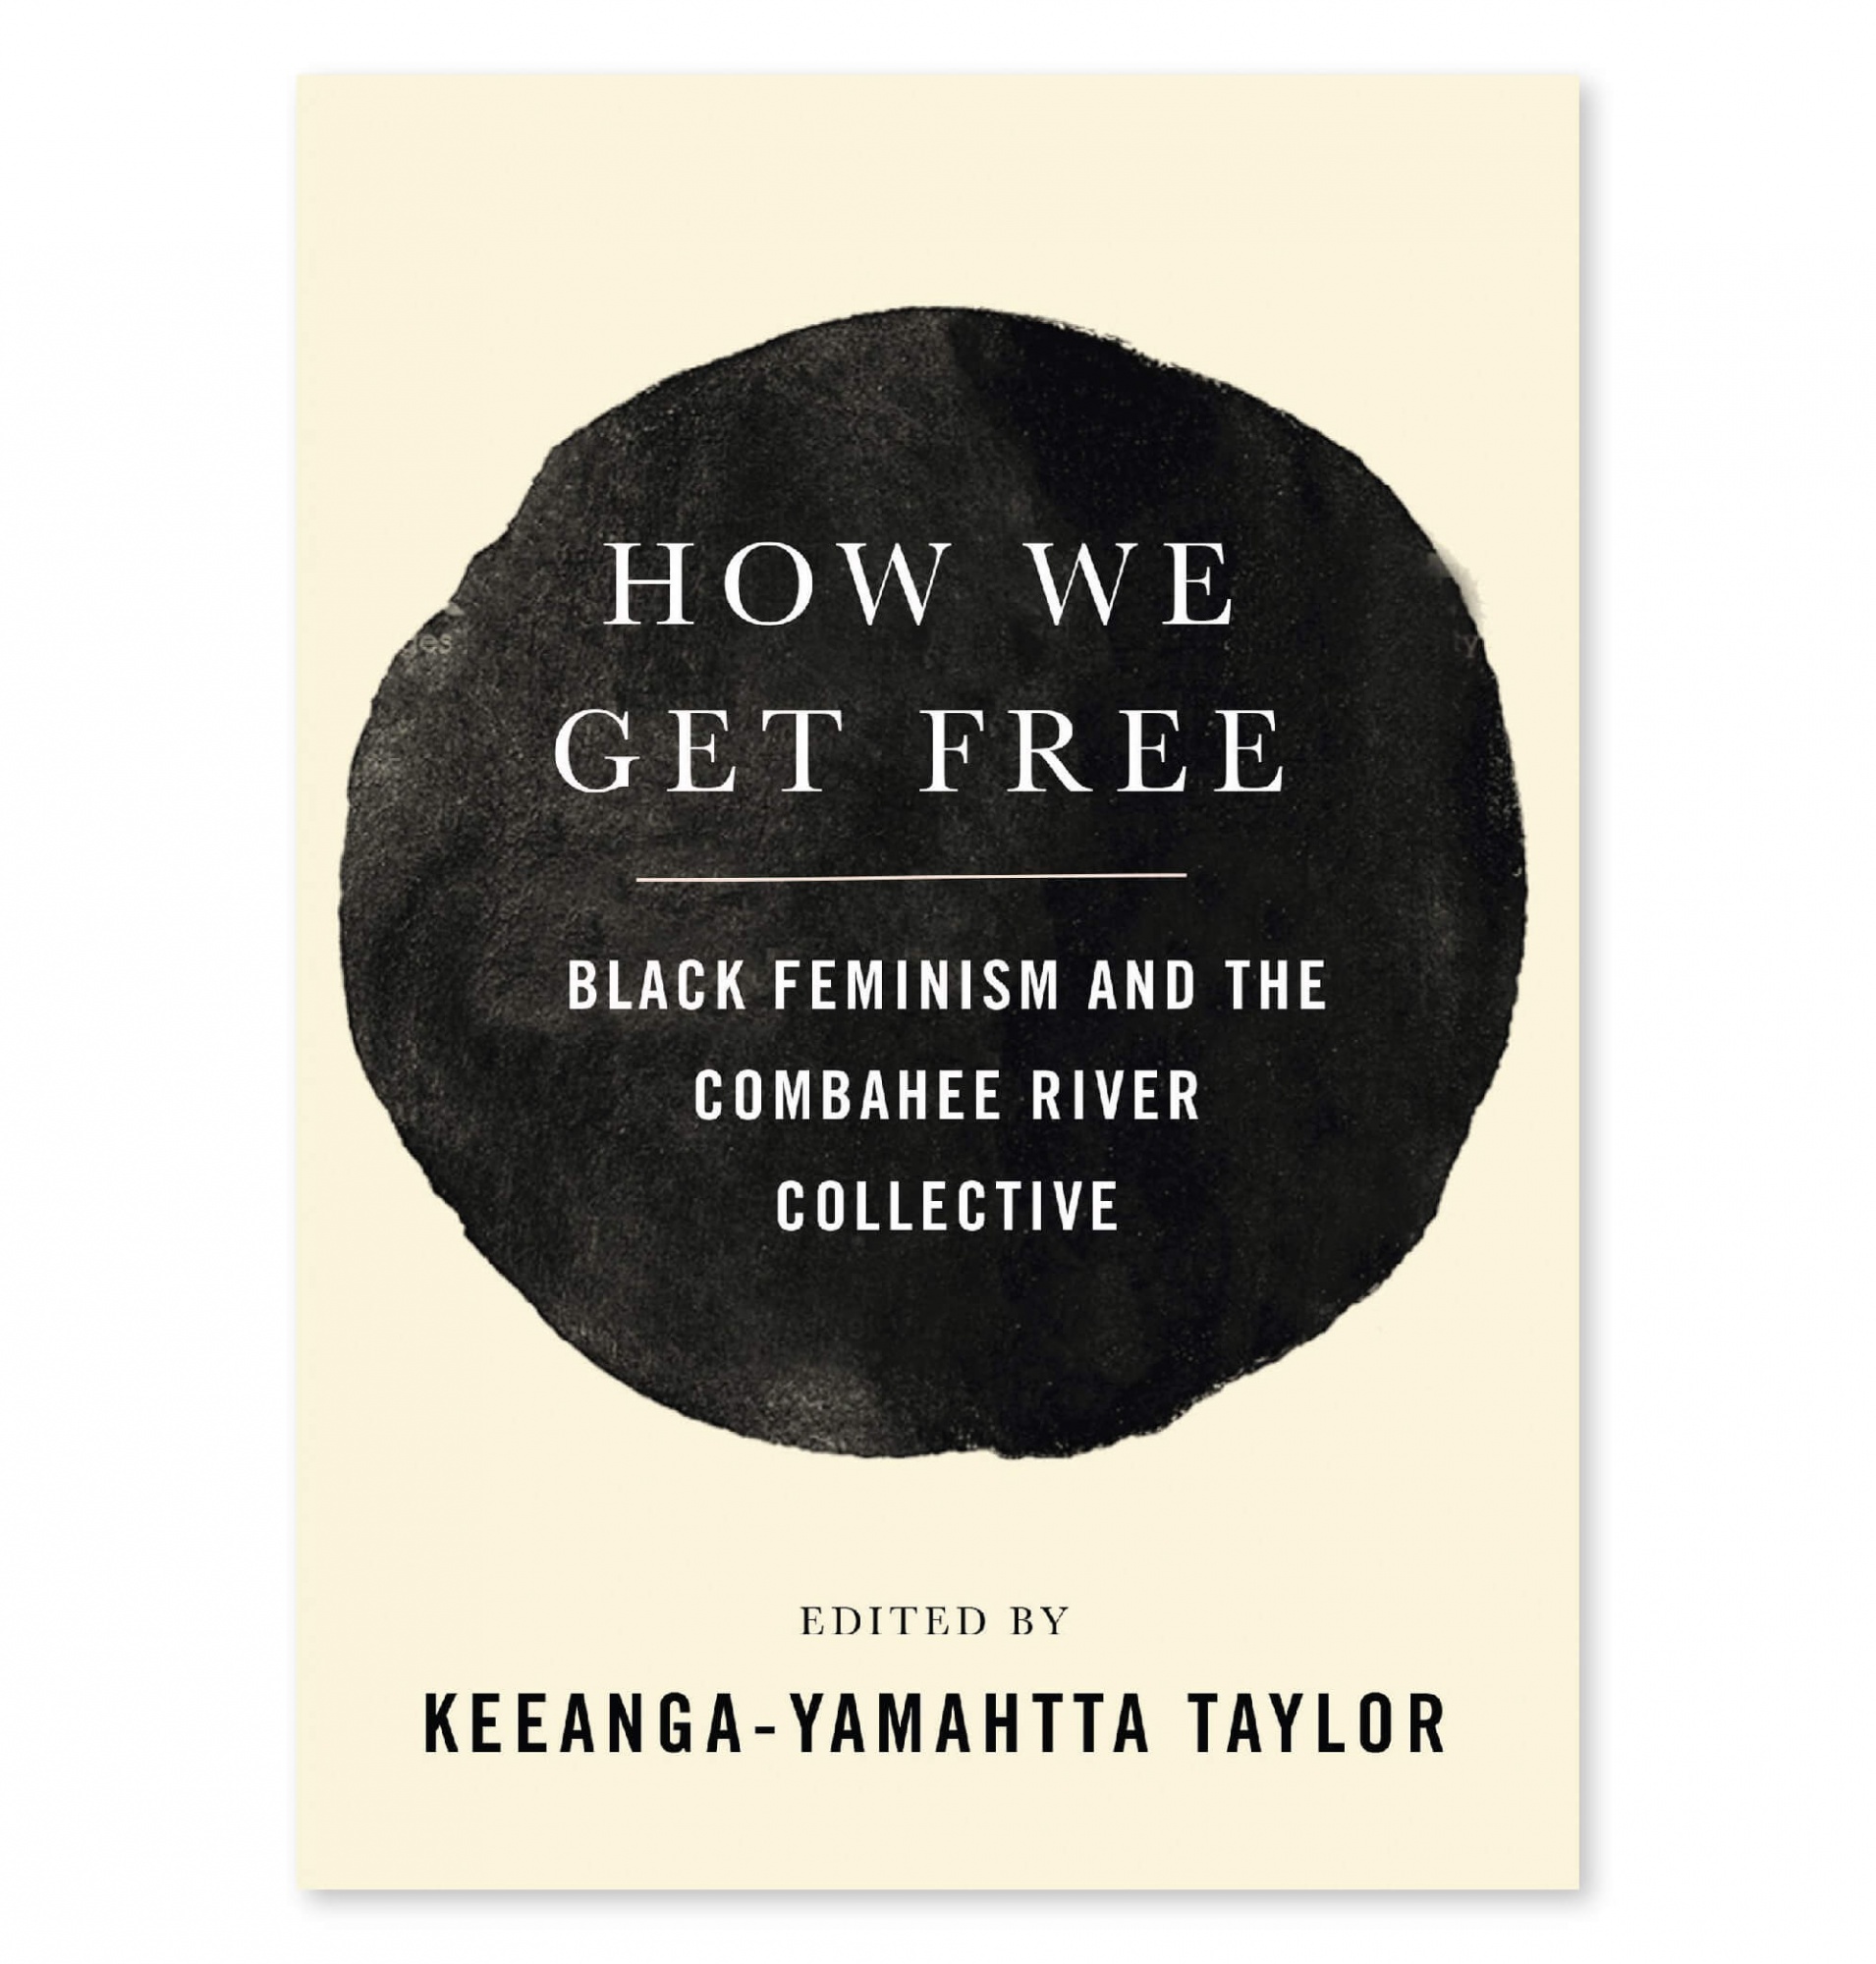 "How We Get Free: Black Feminism and the Combahee River Collective" Written by Keeanga-Yamahtta Taylor